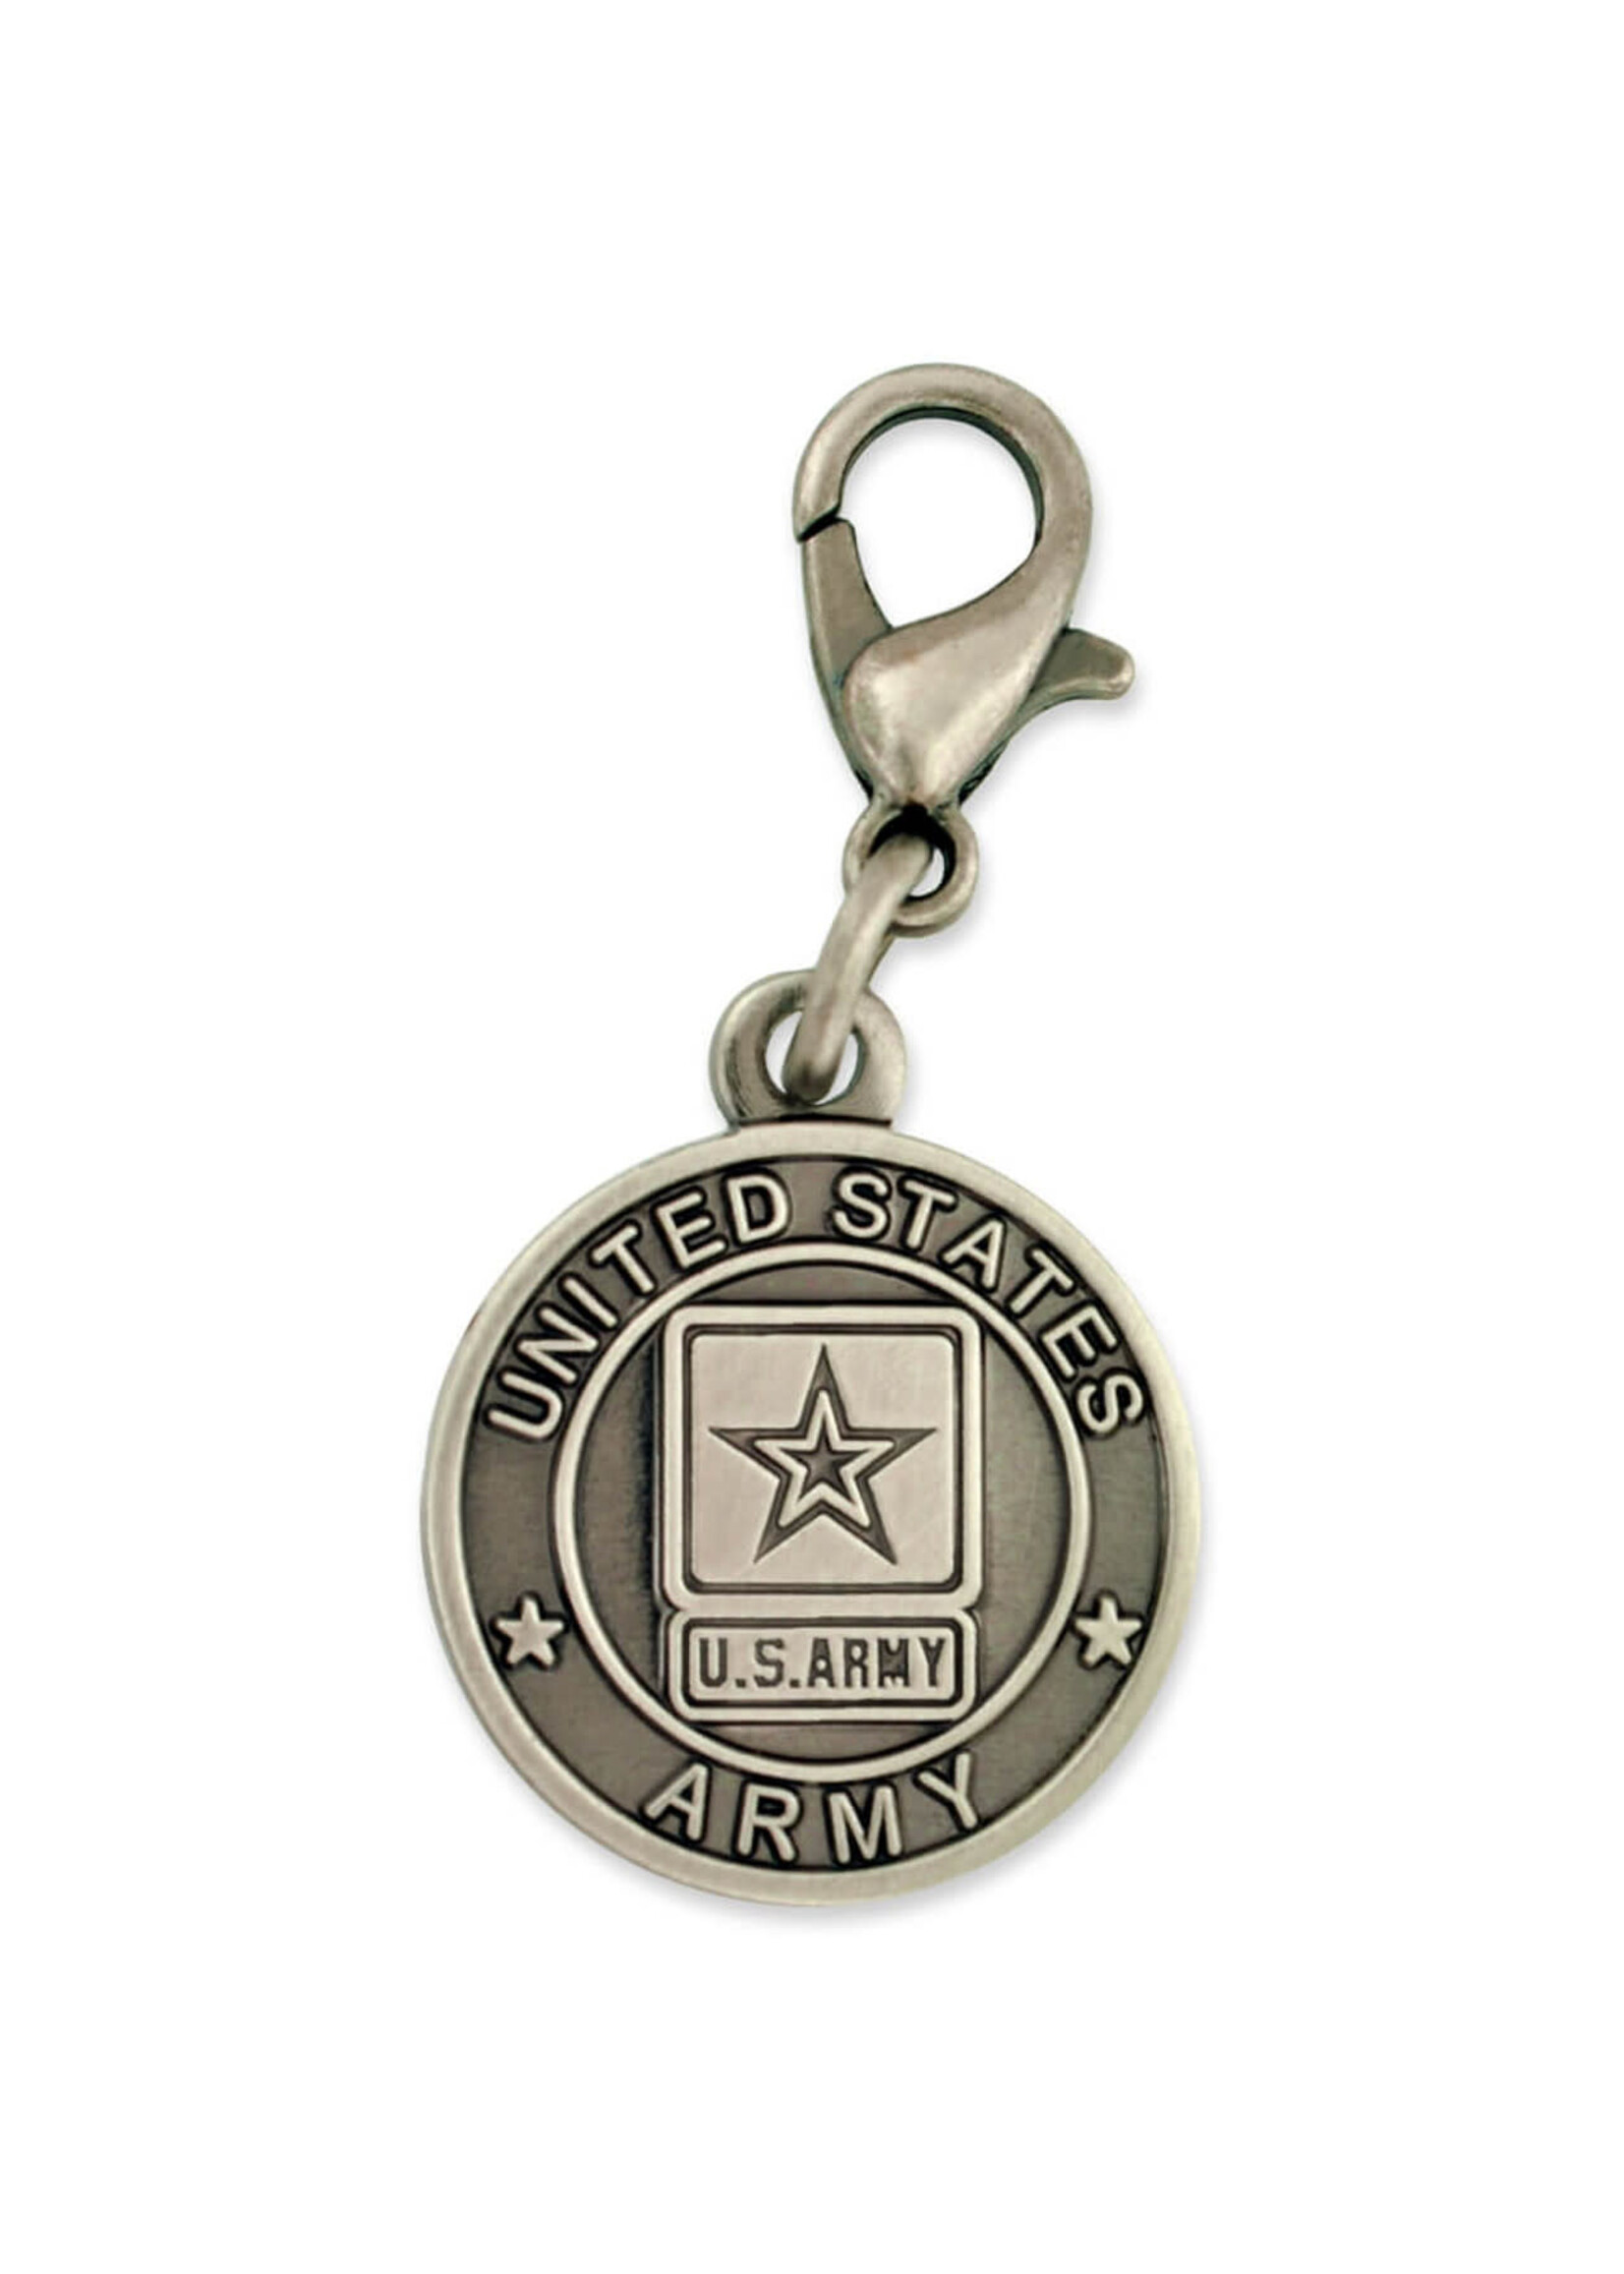 Officially Licensed U.S. Army Charm Silver